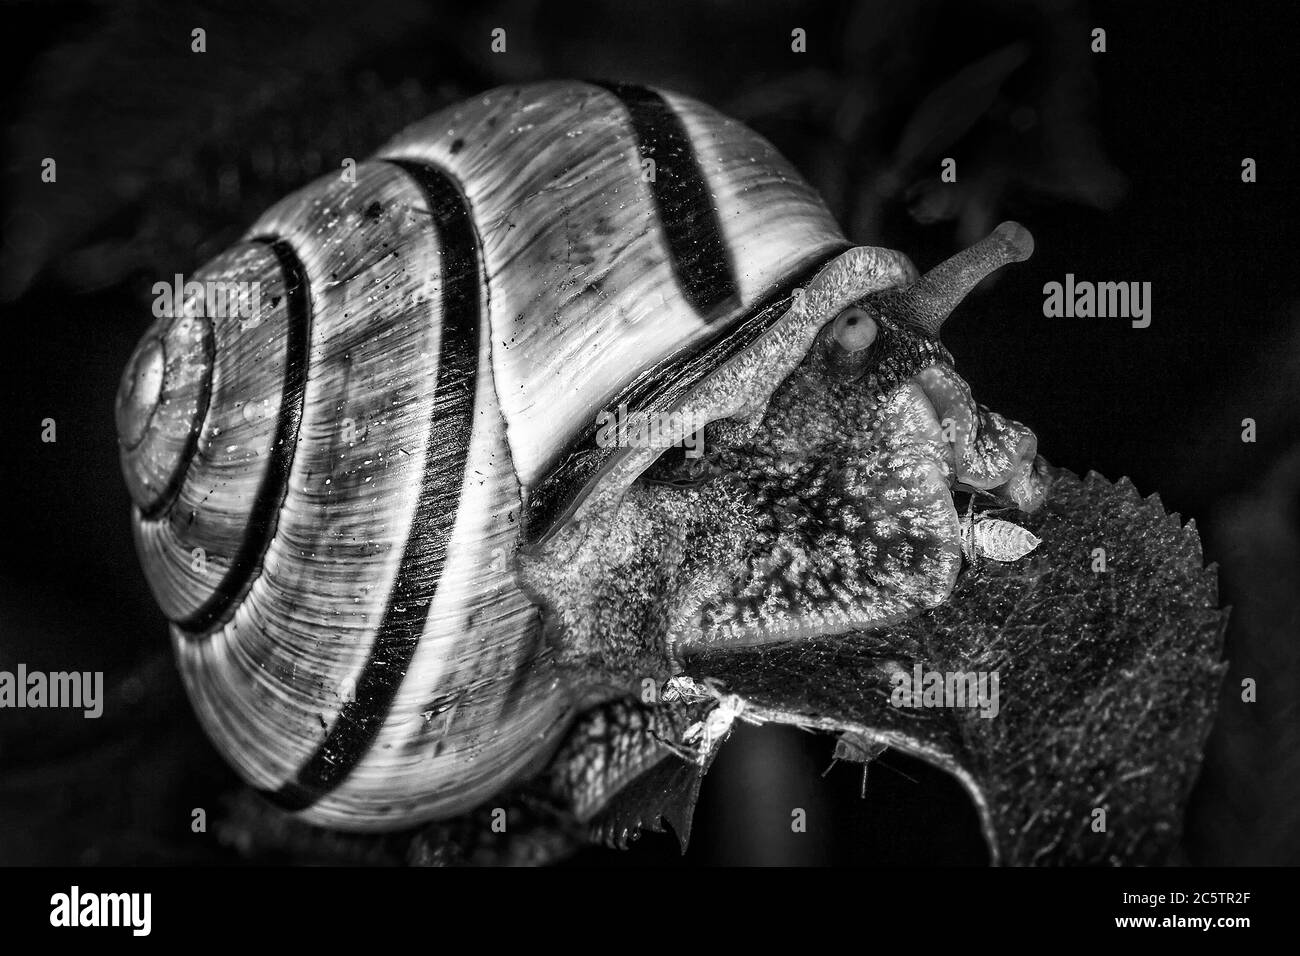 Garden snail which is a mollusc gastropod insect with a shell black and white monochrome image Stock Photo